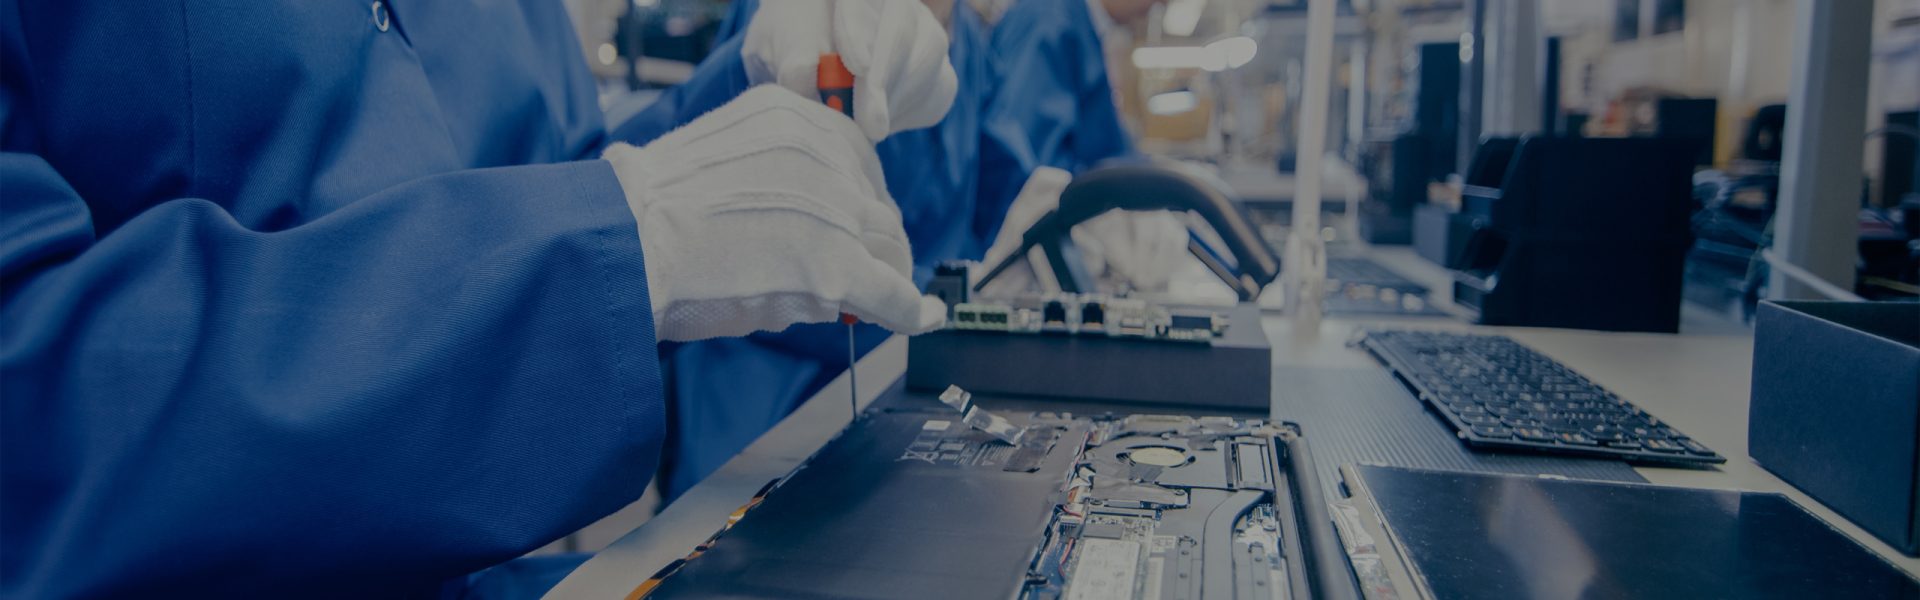 Close-Up of a Female Electronics Factory Worker in Blue Work Coat Assembling Laptop's Motherboard with a Screwdriver. High Tech Factory Facility with Multiple Employees.